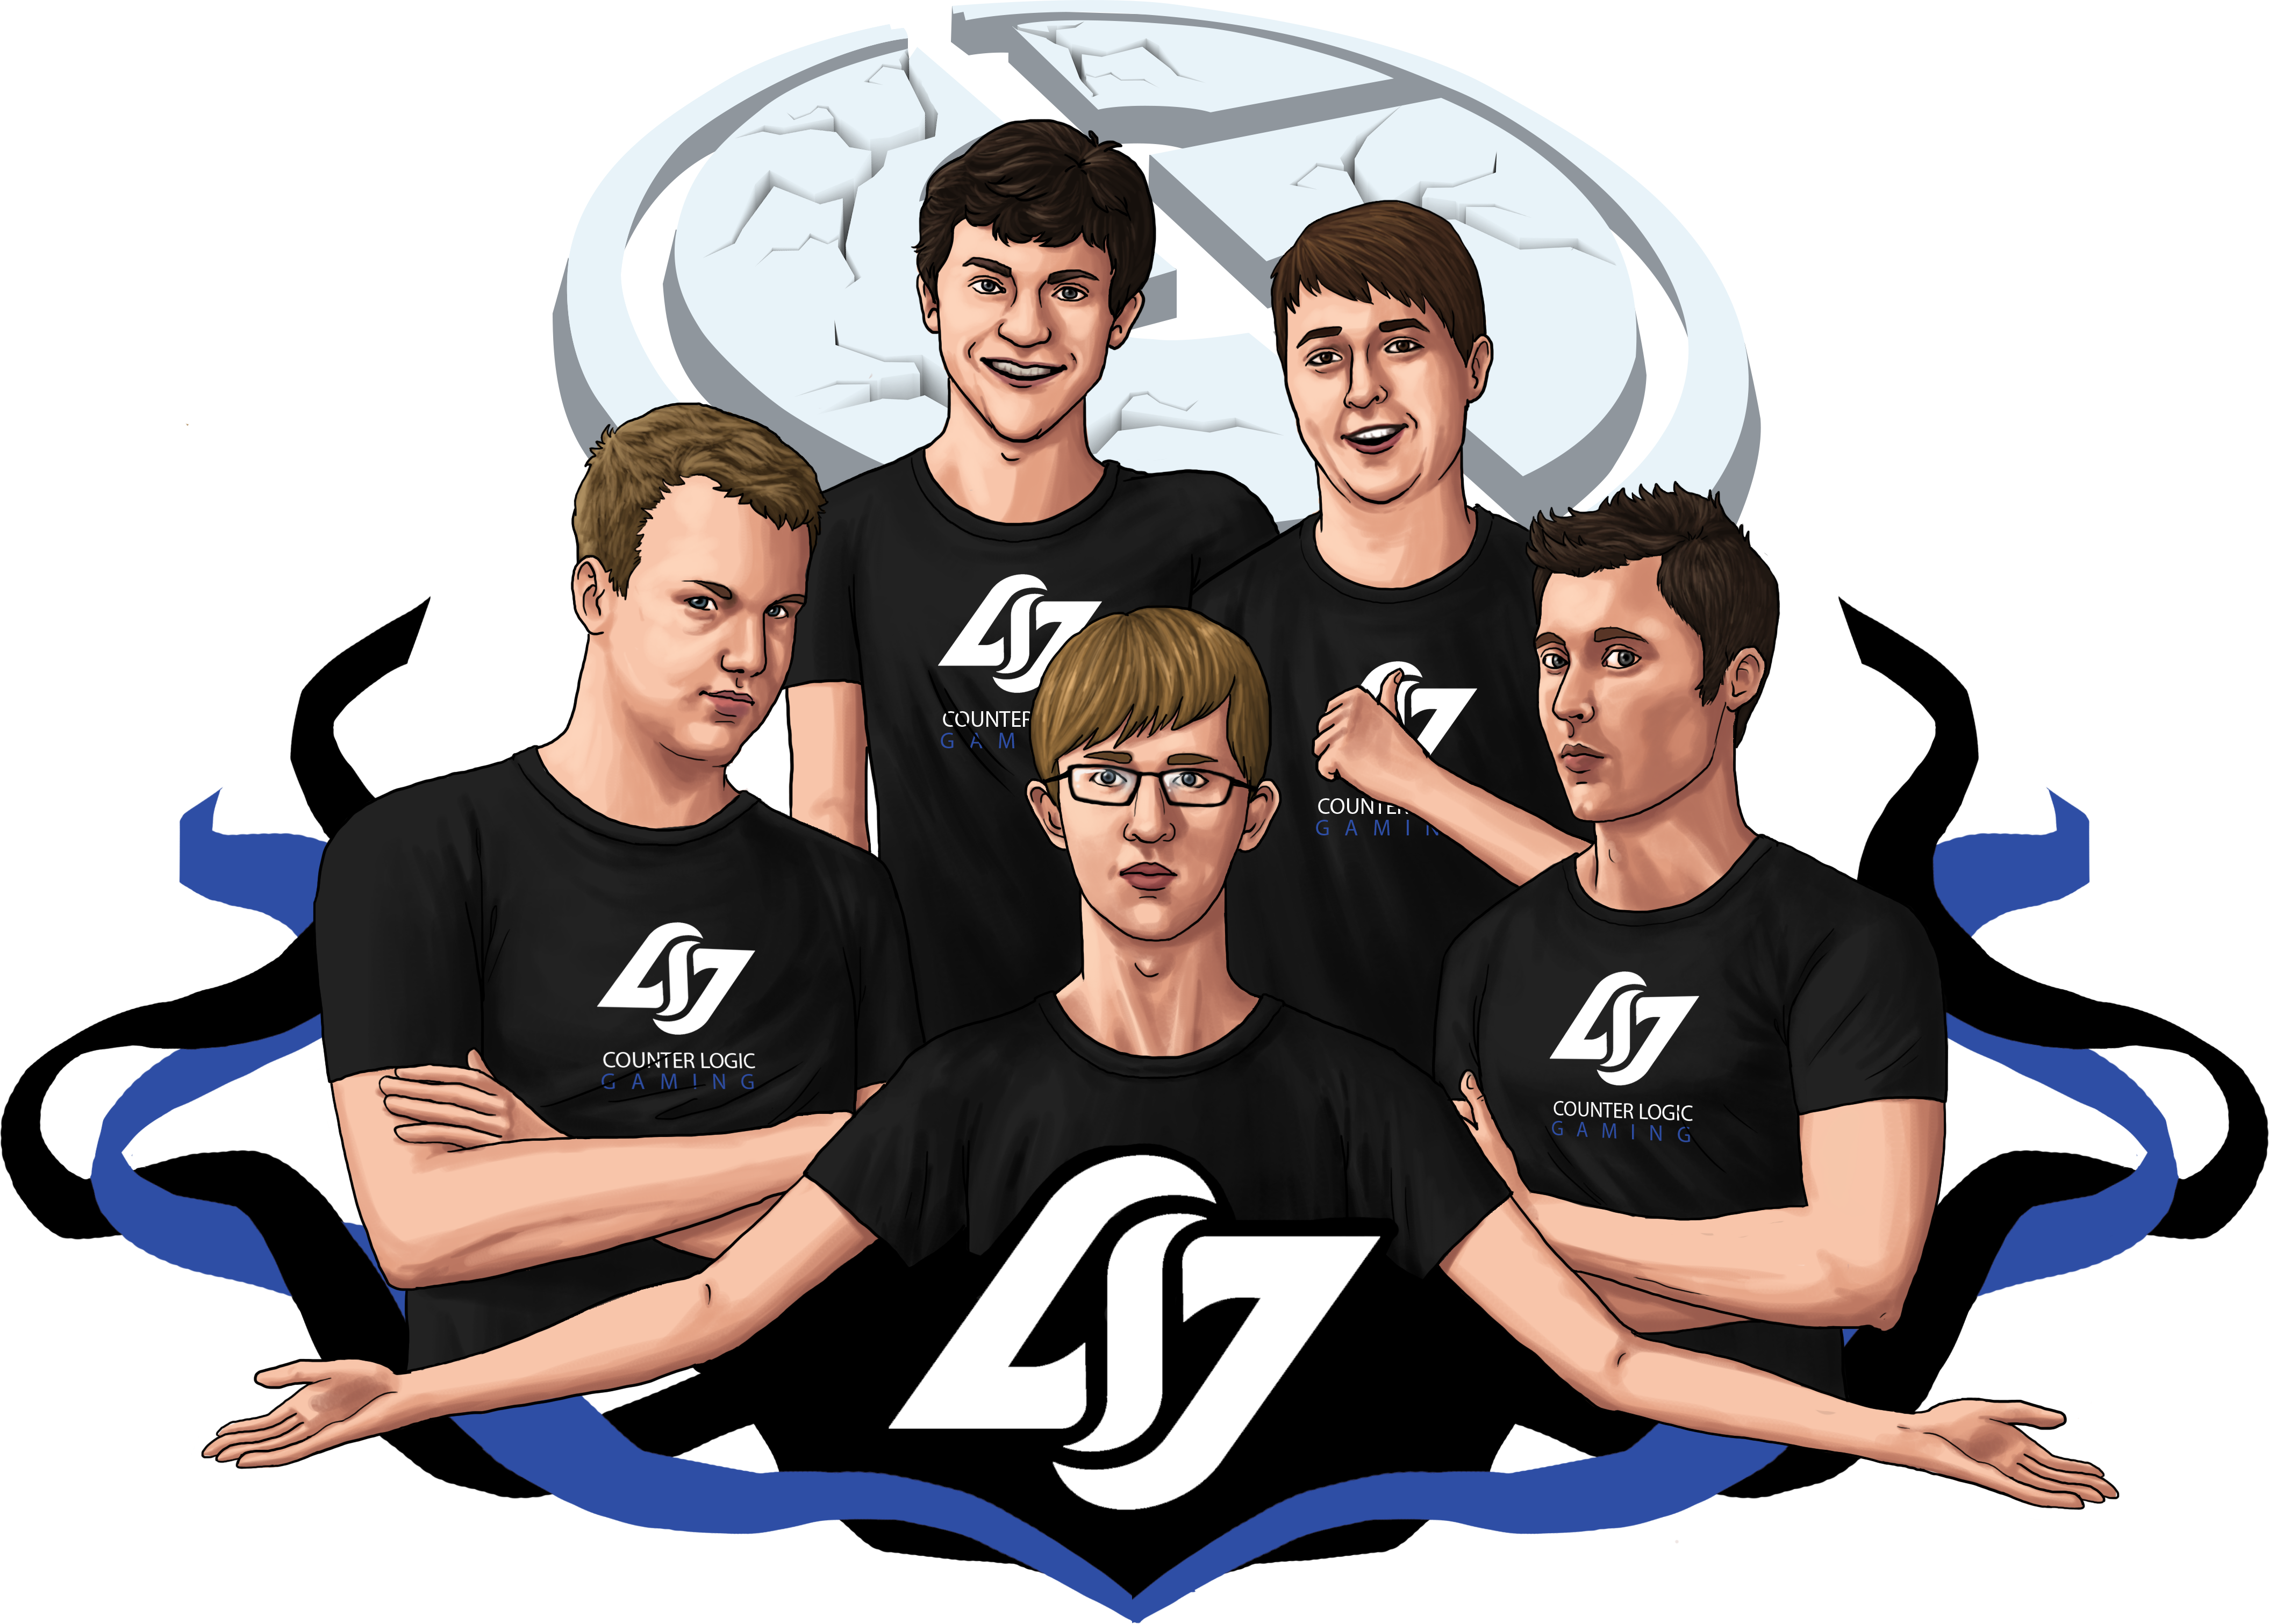 Waiting for greatness - the CLG.EU/EG story